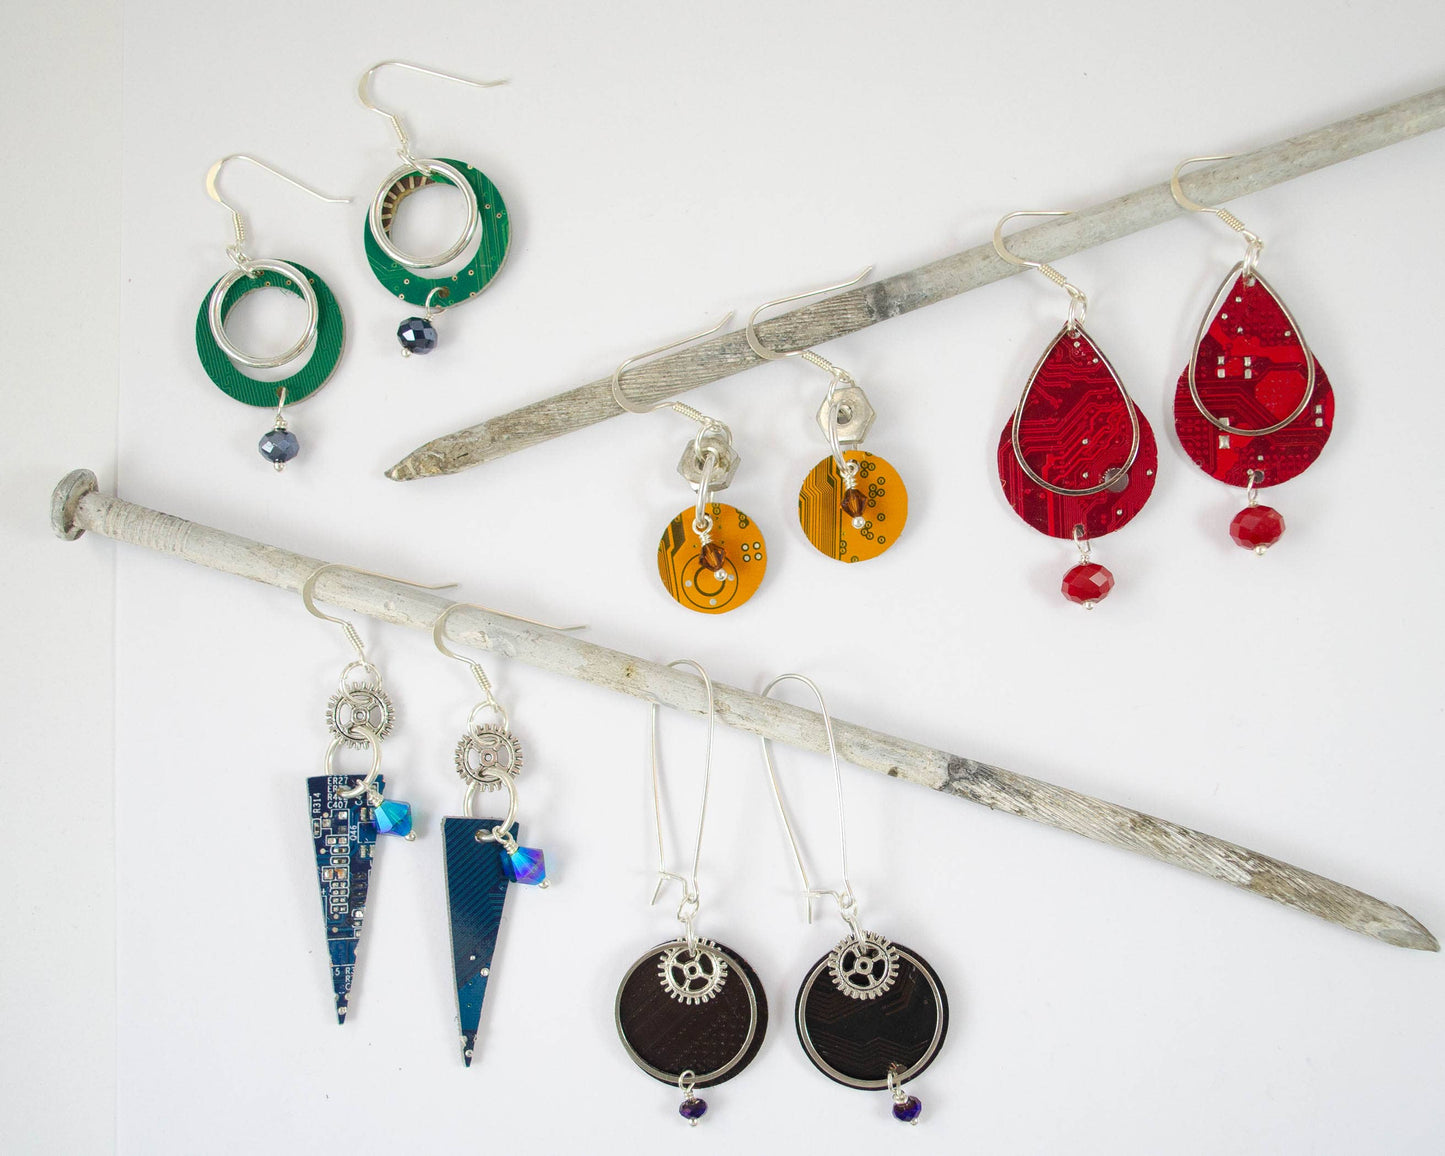 Different shapes of circuit board have been made into multi-colored earrings and are displayed on knitting needles